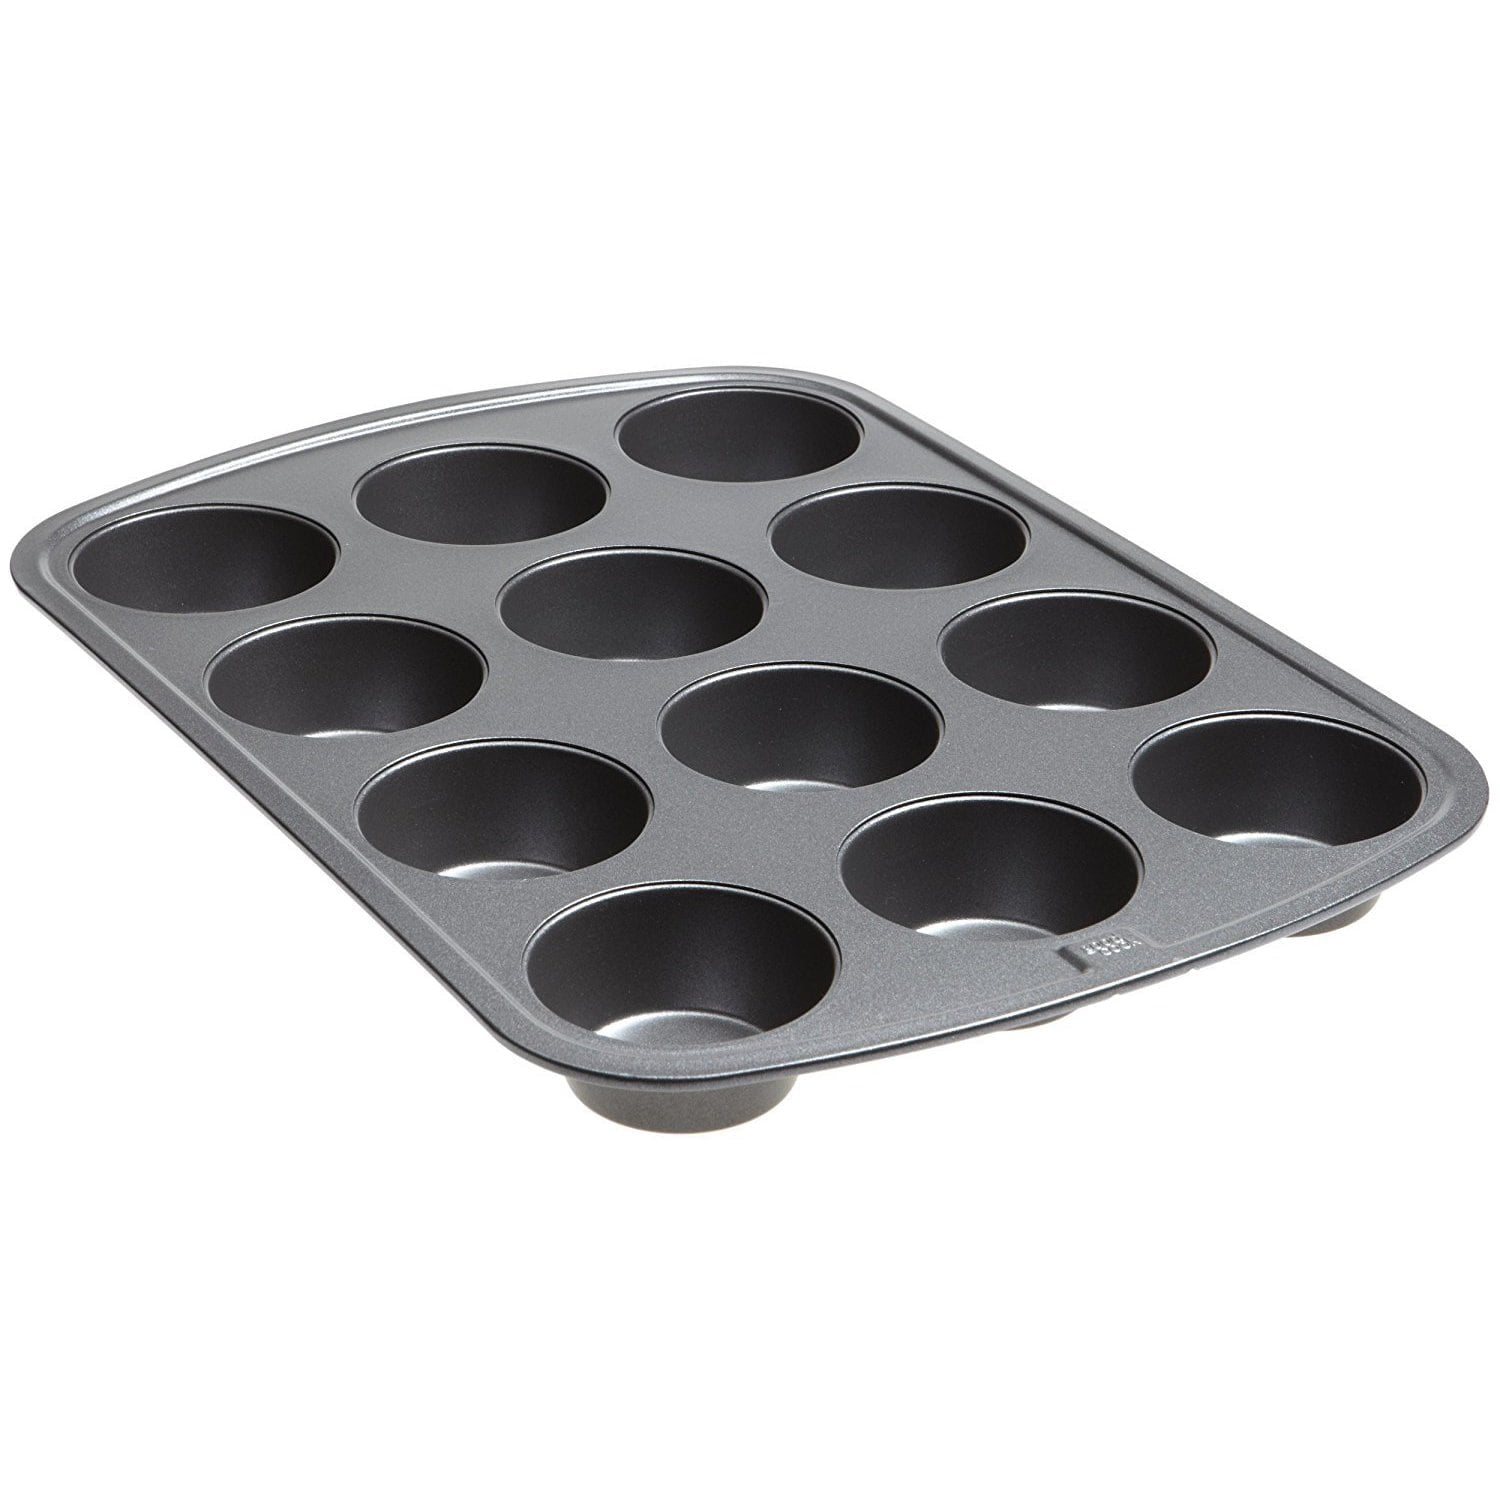 MUFFIN PAN 12 CUP / NON STK - Big Plate Restaurant Supply